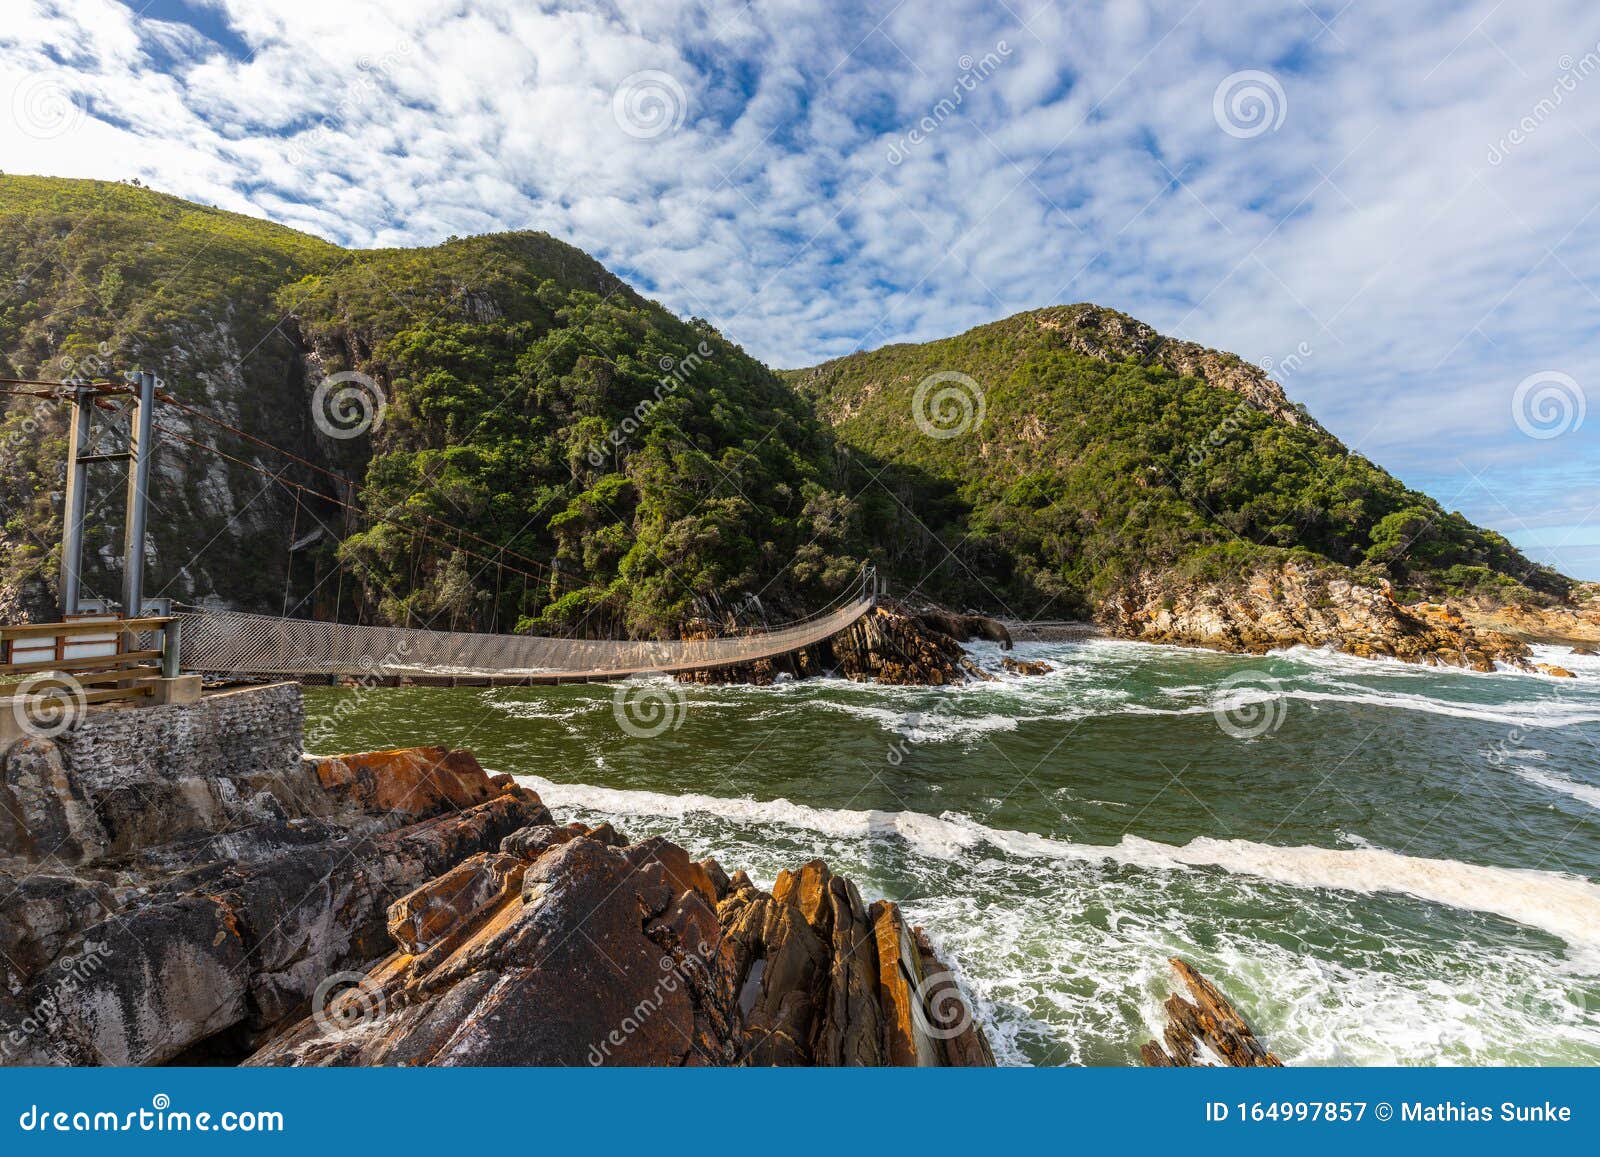 A Suspension Bridge Over the Storms River Mouth Stock Image - Image of